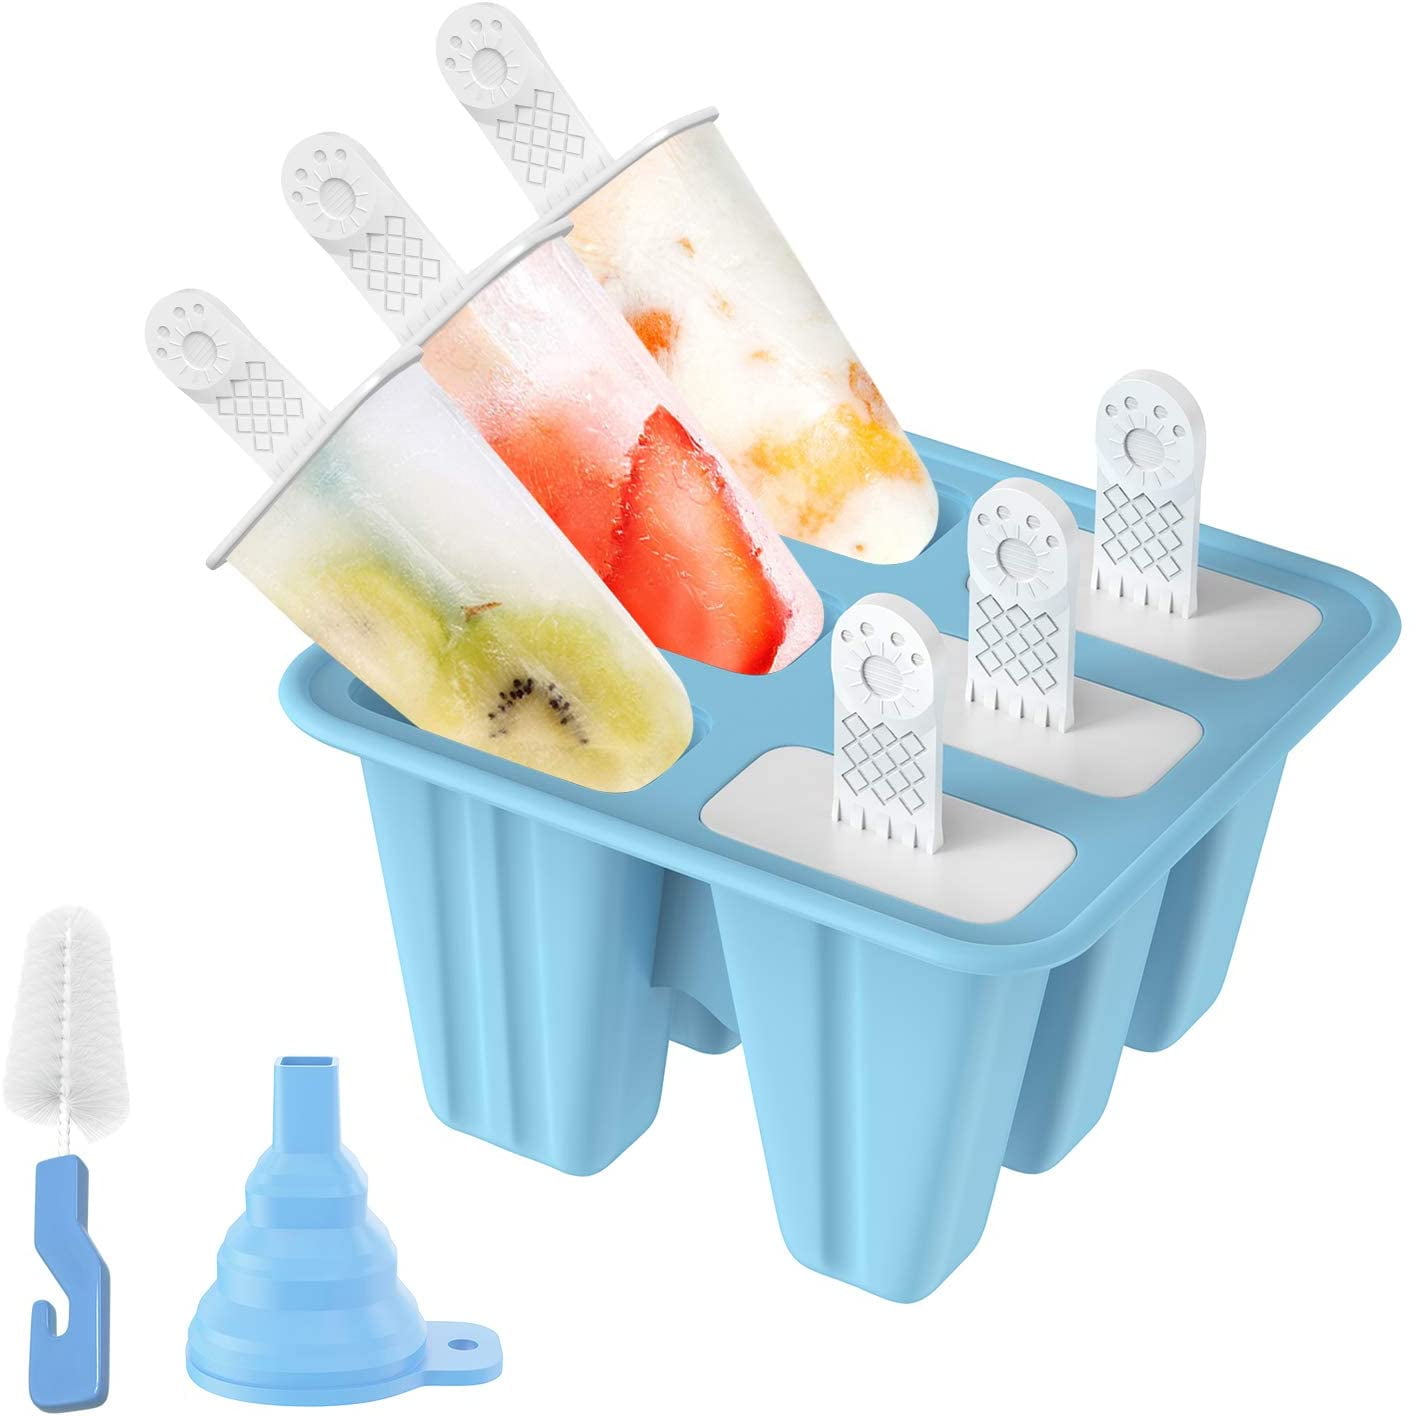 Blue SiliconeIce Ice，Popsicle Molds 6 Pieces Silicone Ice Pop Molds BPA Free Popsicle Mold Reusable Easy Release Ice Pop Make 